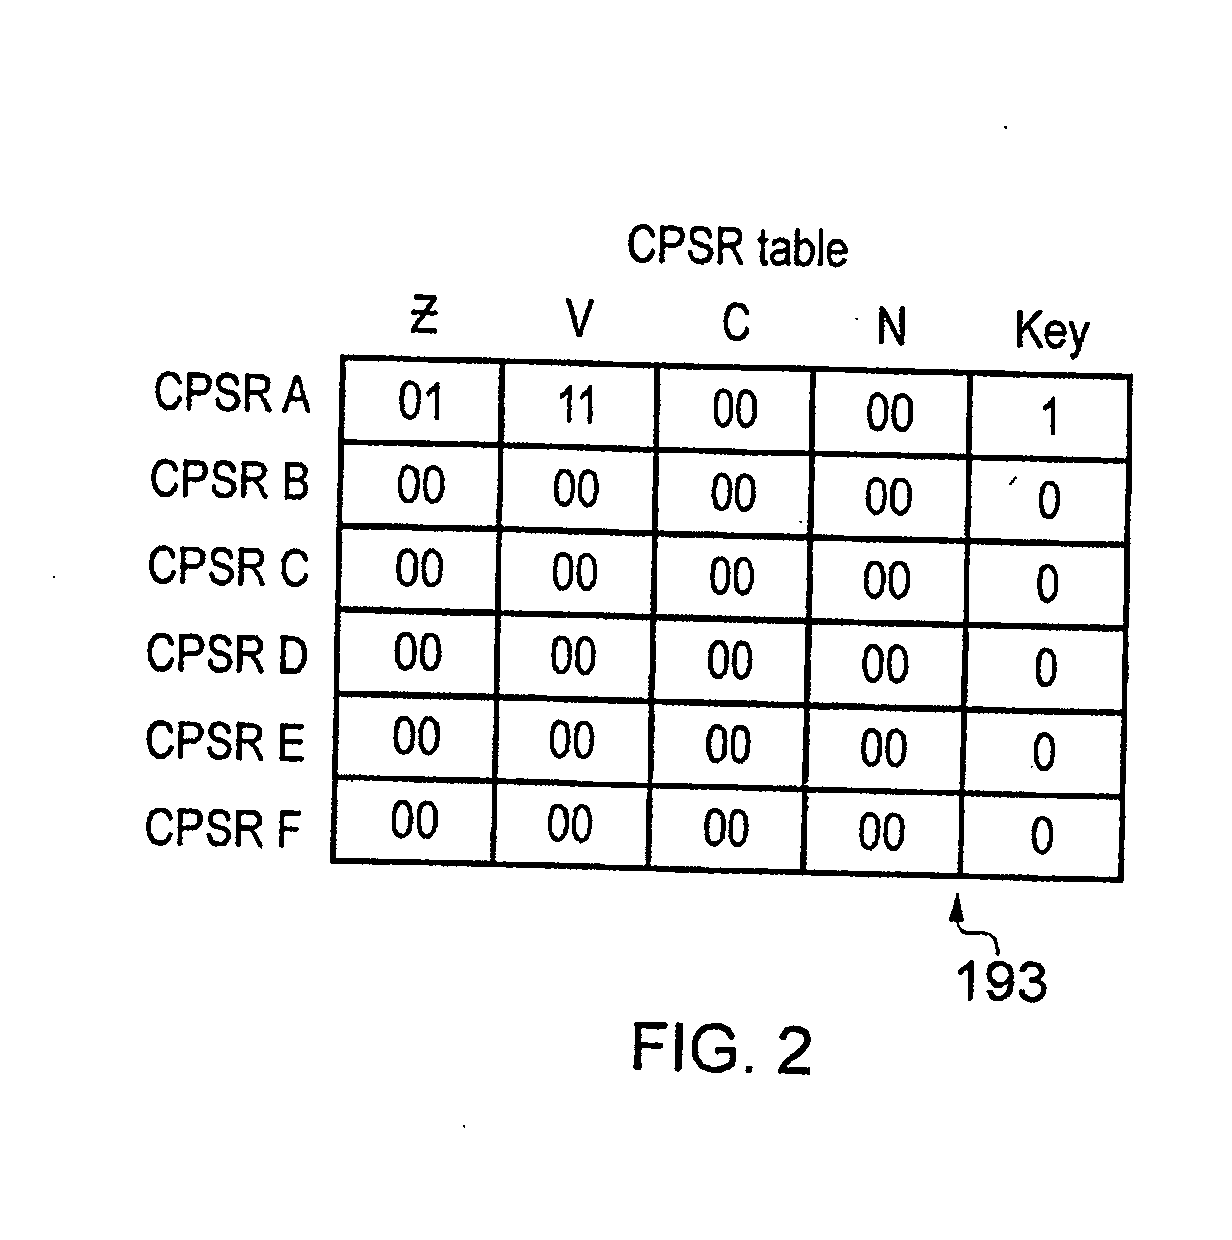 Tracing of a data processing apparatus